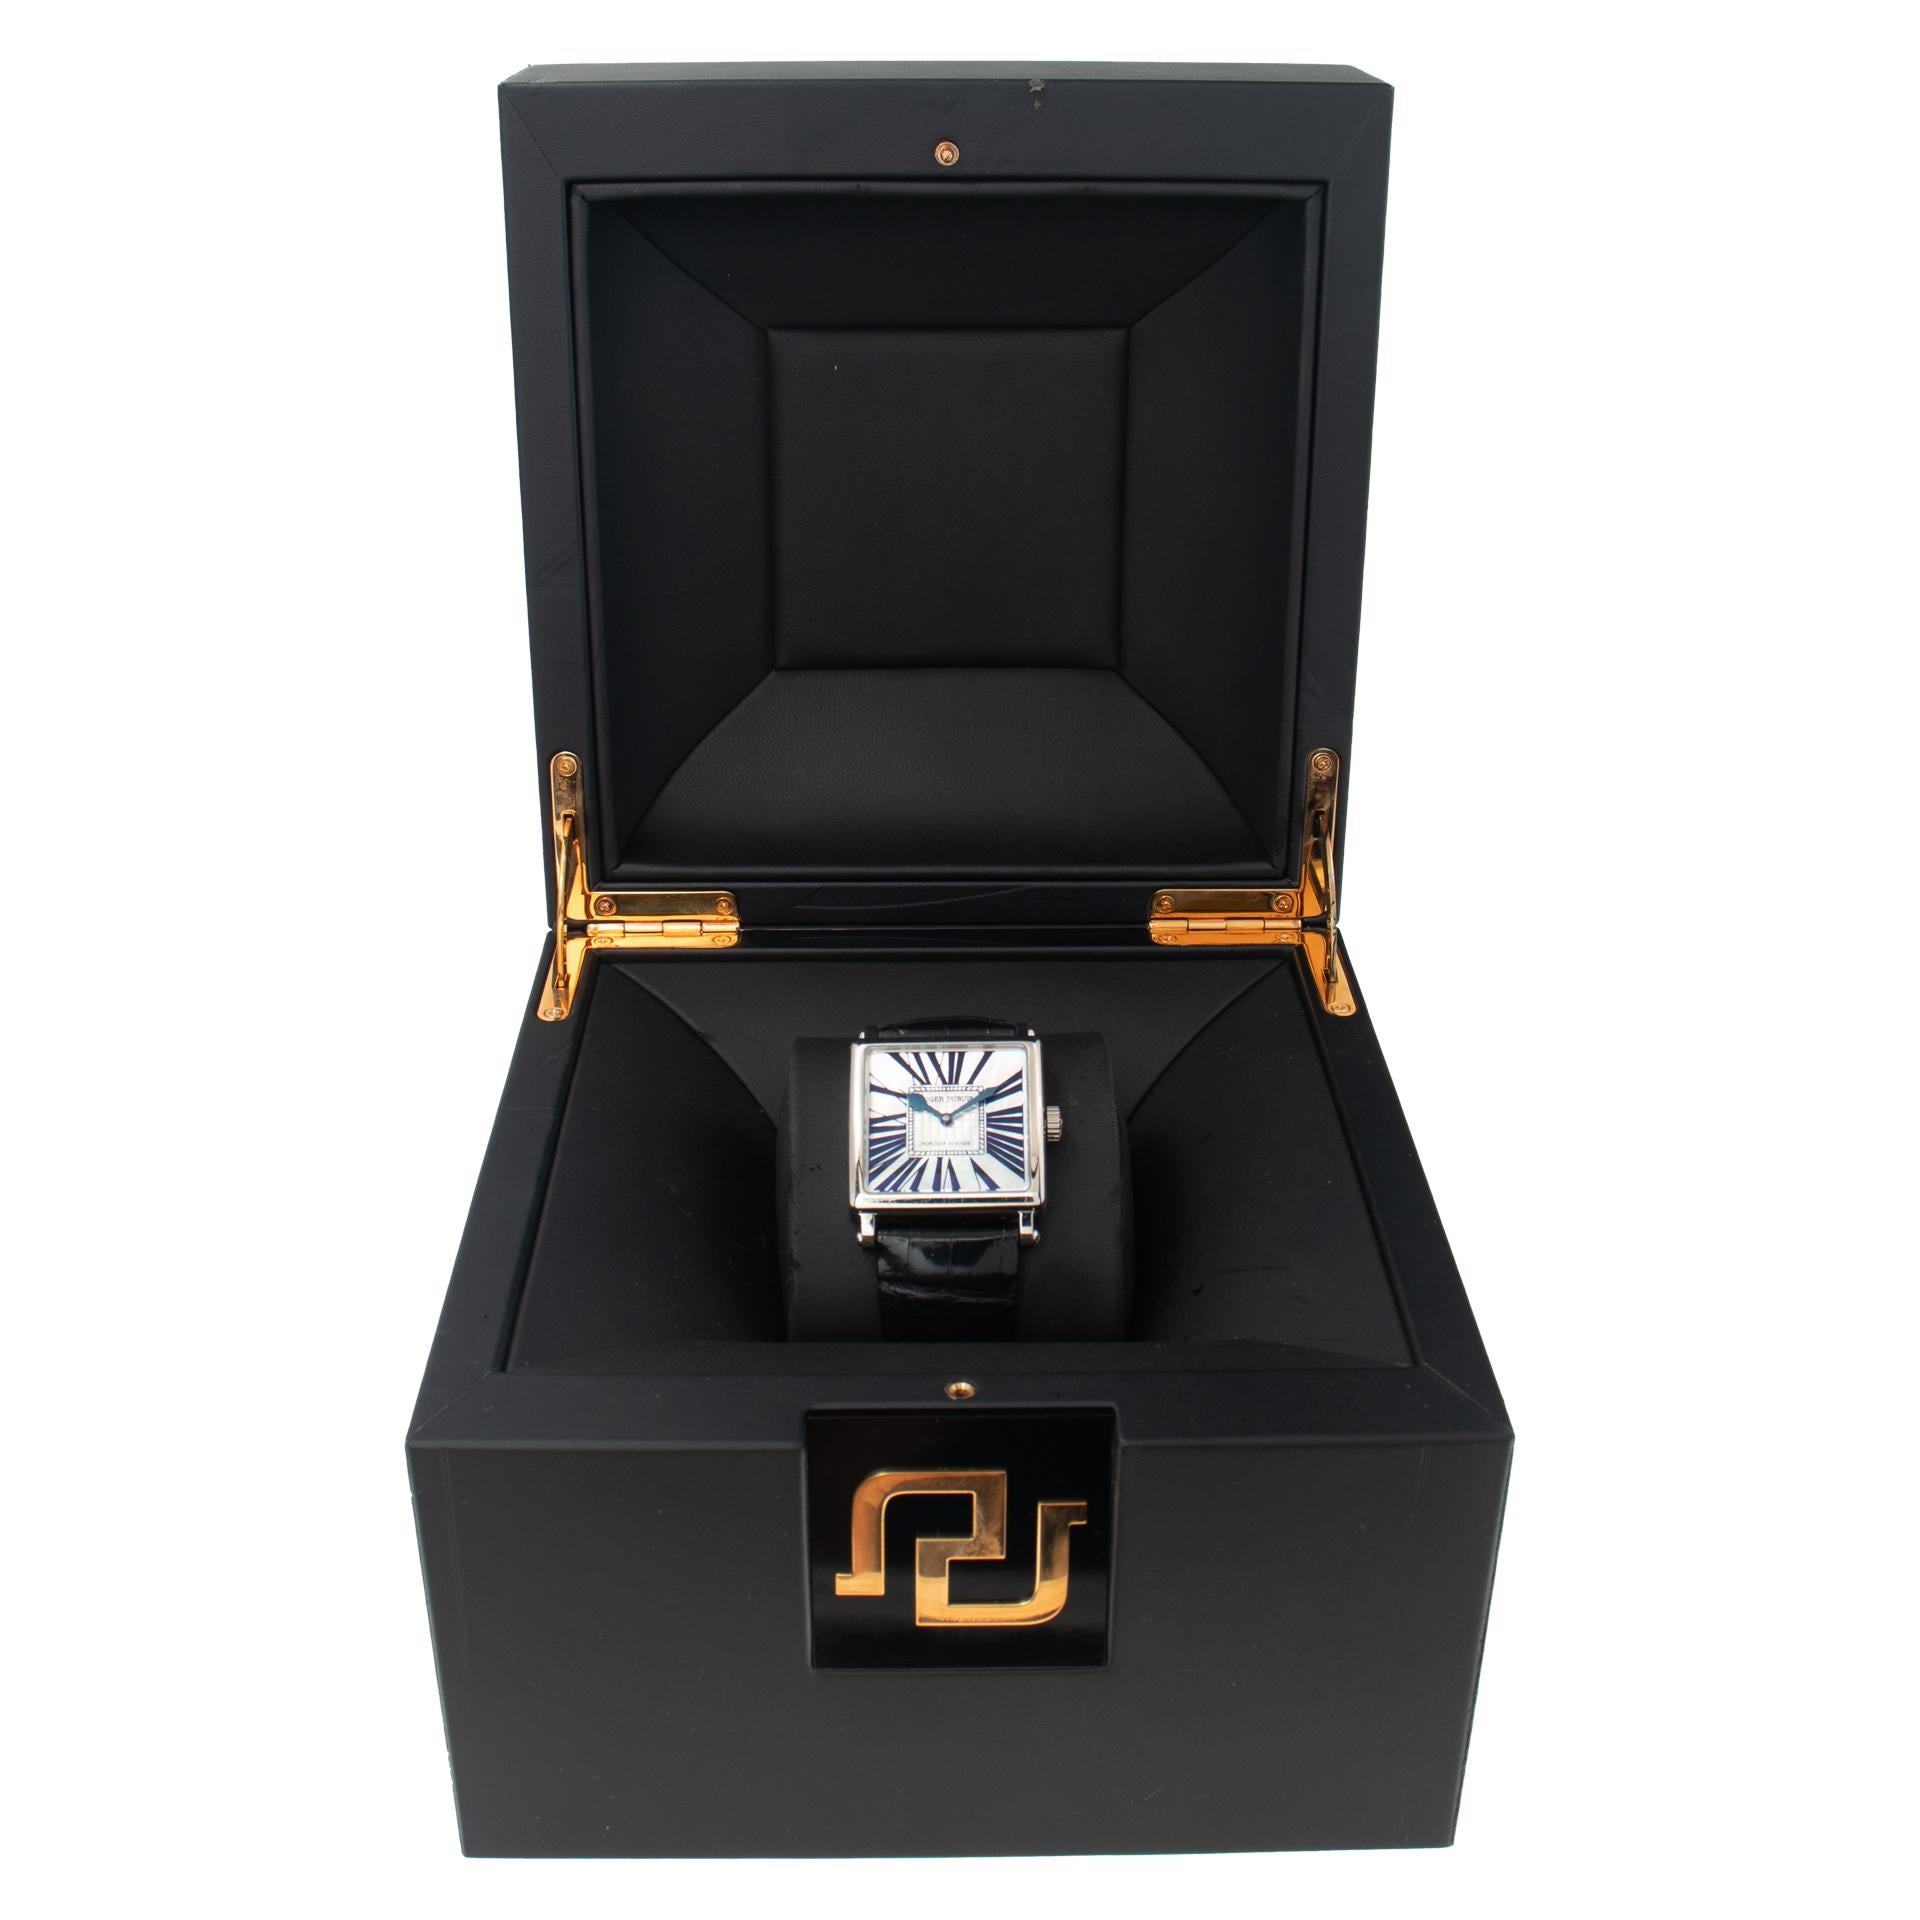 Roger Dubuis Golden Square 18k white gold watch Ref DBGS0322 For Sale 2